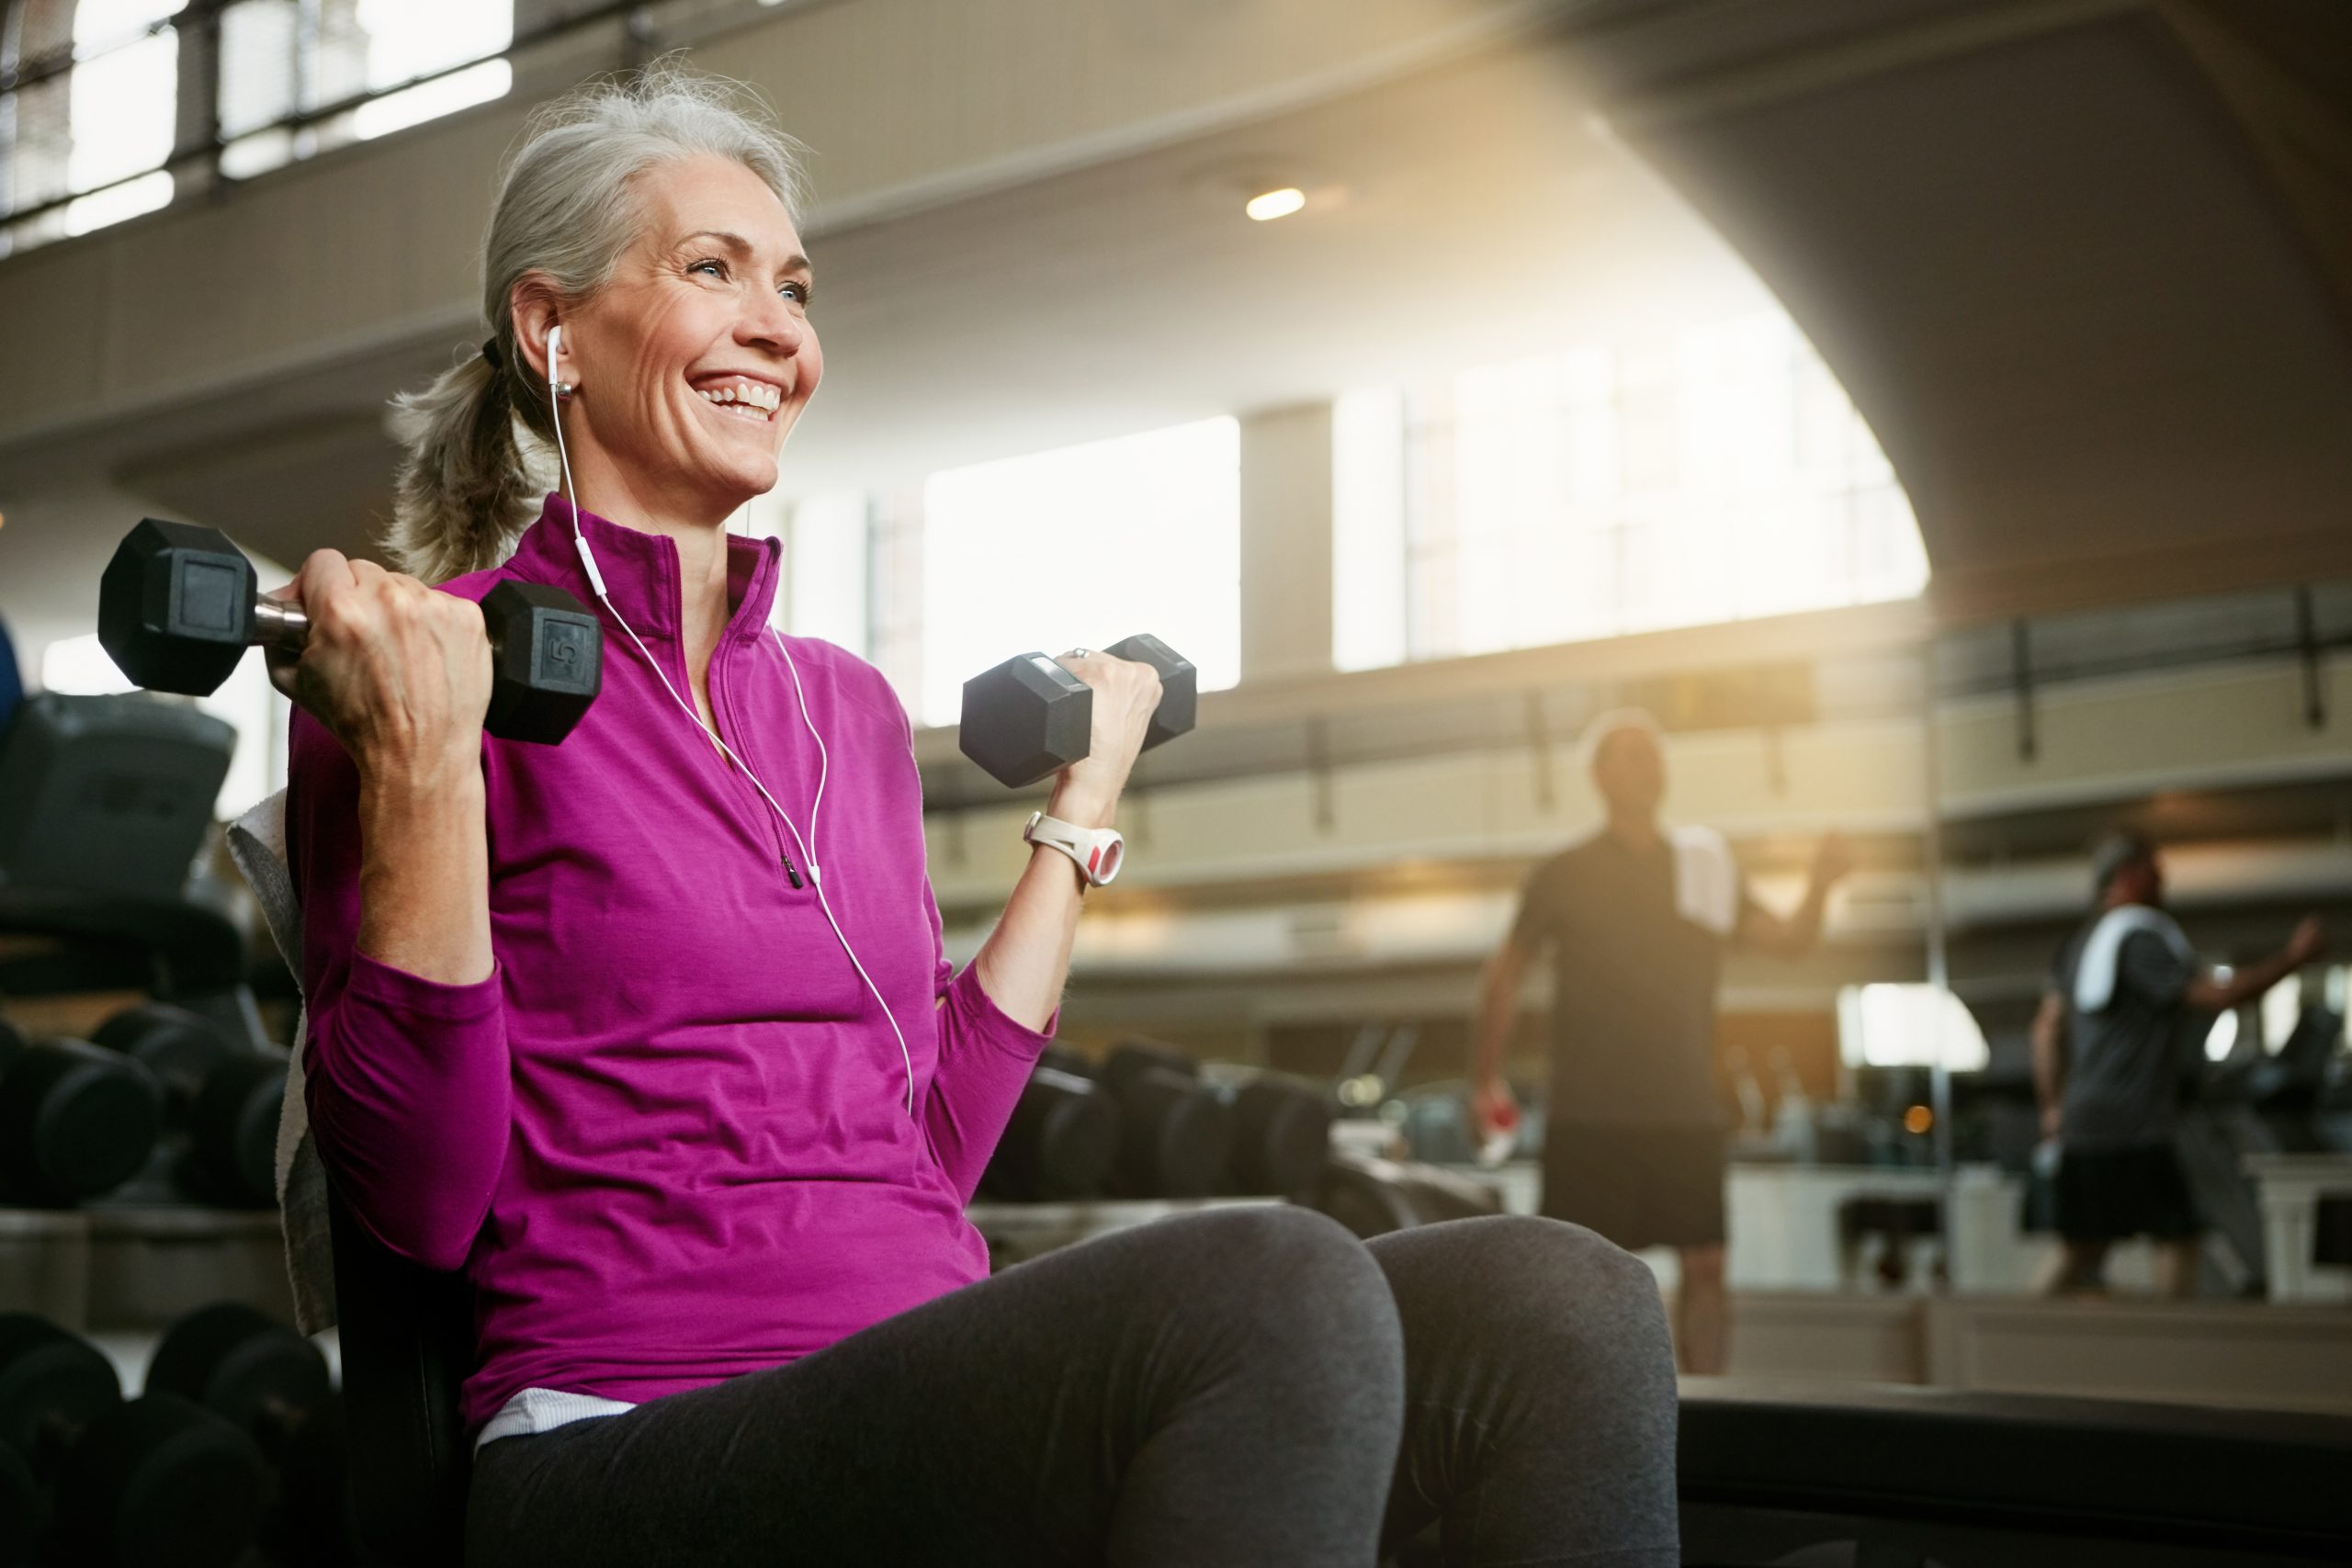 an elderly woman listening to music and doing bicep curls in a gym and smiling